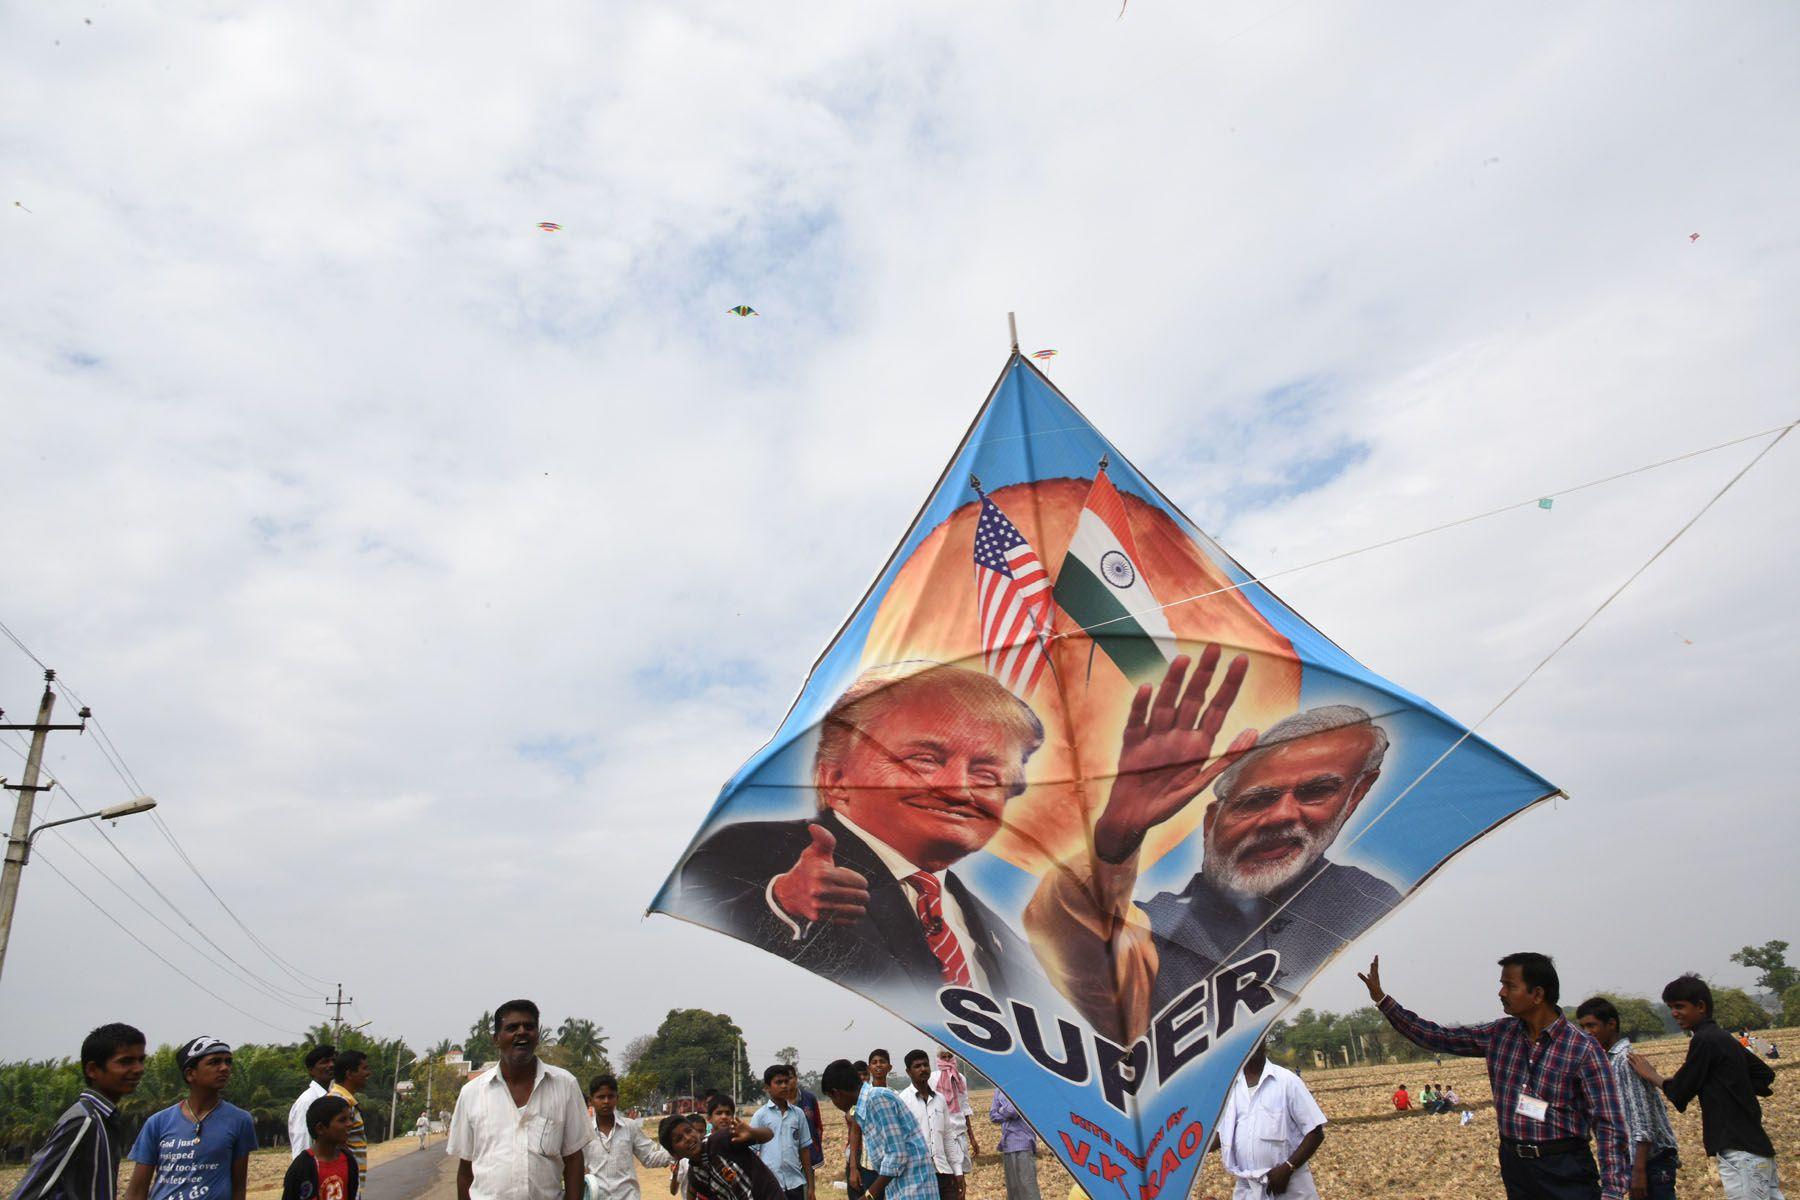 Indo-US friendship in the wake of Trump presidency made it to Suttur fair as a giant kite used the two world leaders bromance as its theme during the kite competition